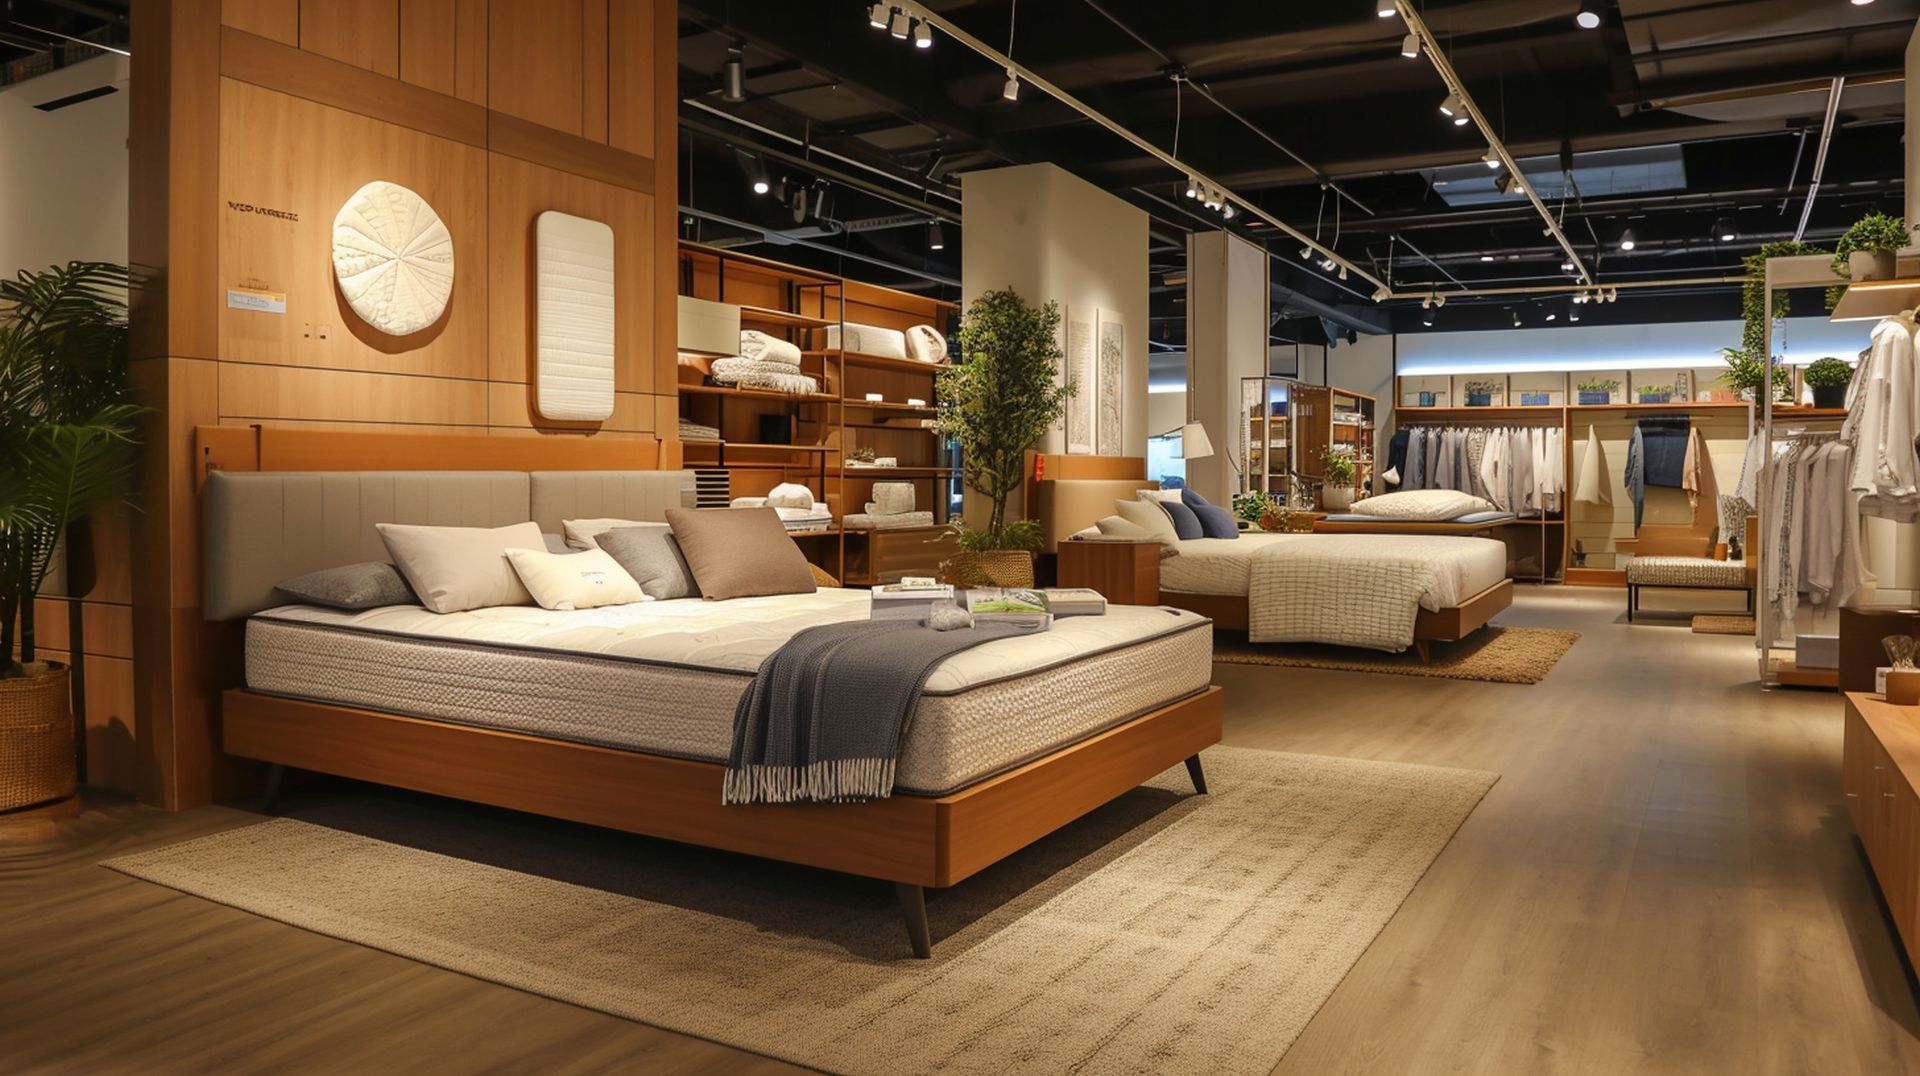 If you're looking for a new bed, mattress stores in San Antonio offer the best customer and delivery service, financing, and warranties in Texas